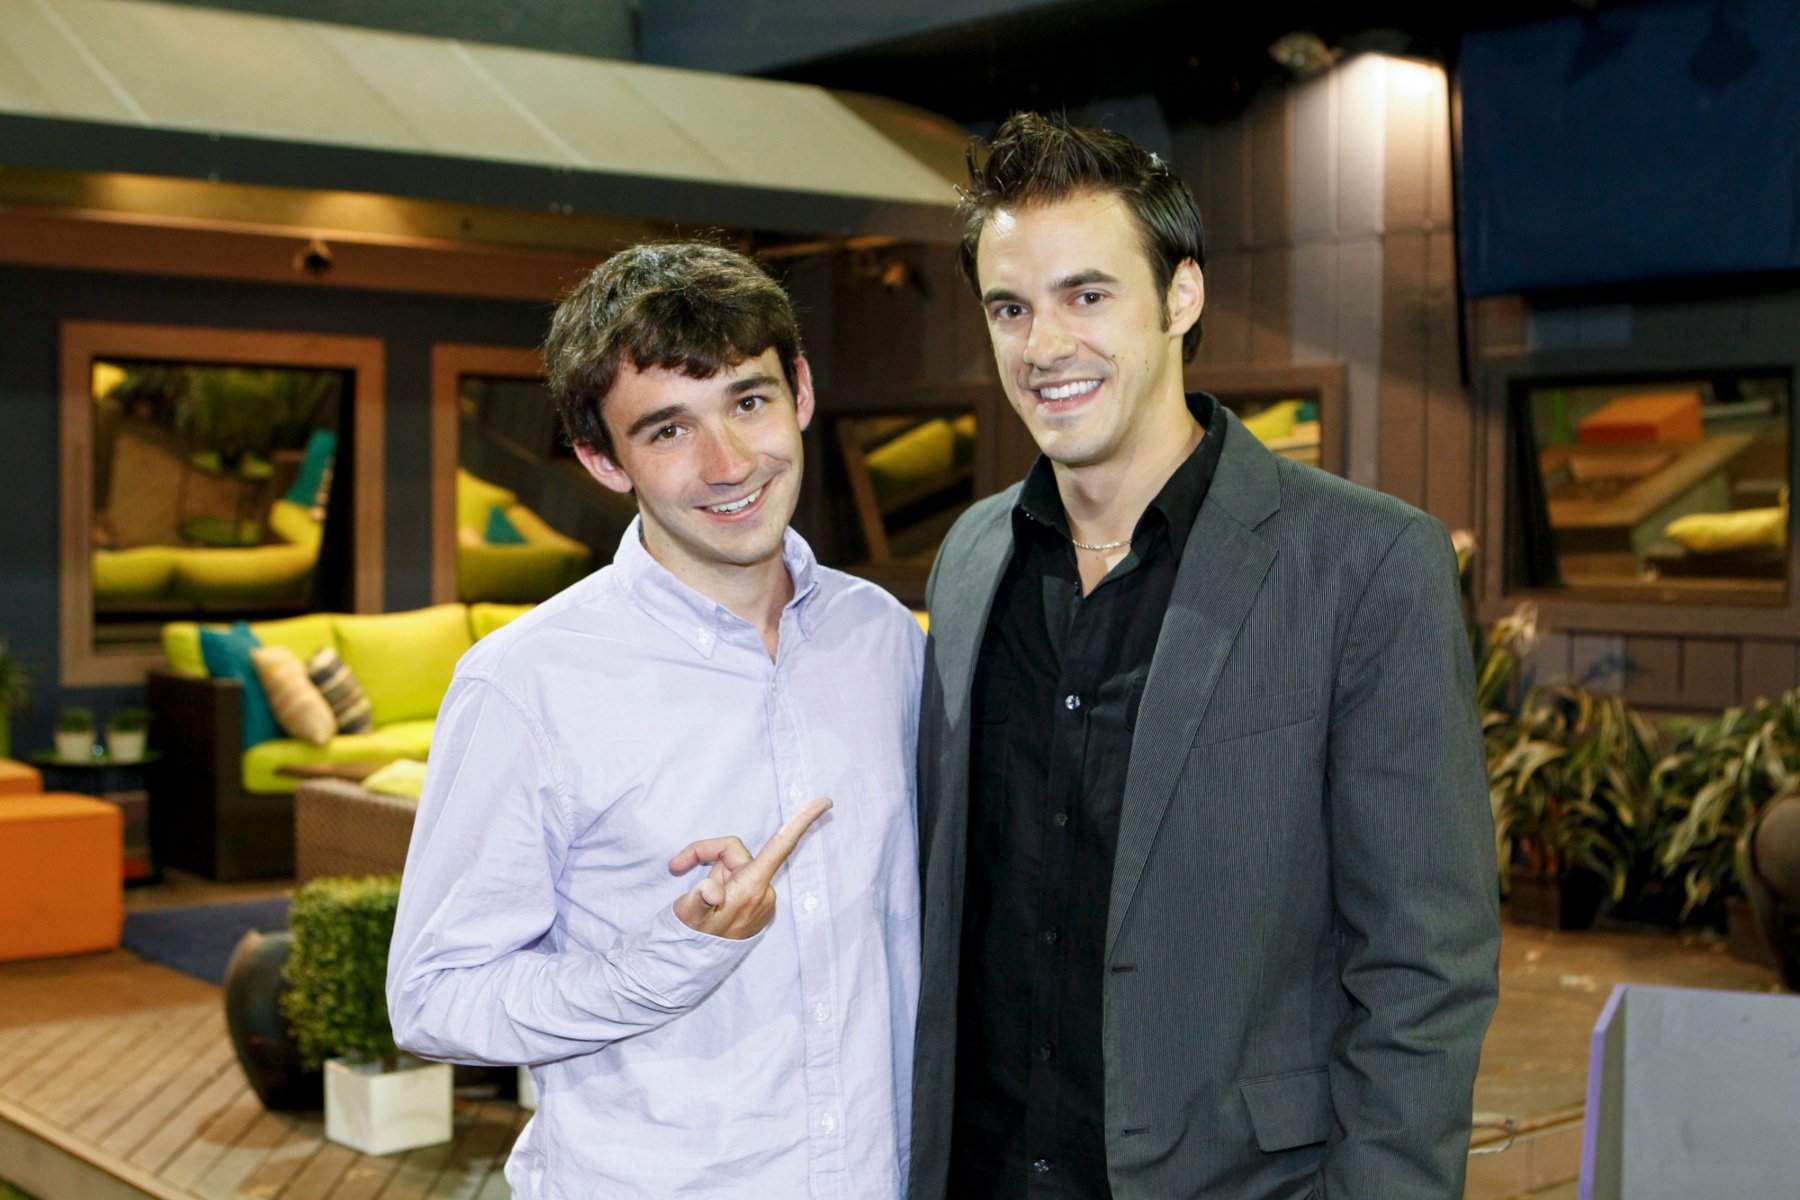 'Big Brother' Season 14 winner and runner-up Ian Terry and Dan Gheesling. The two are standing next to one another. Ian is pointing up at Dan, and Dan is wearing a dark shirt and grey blazer.